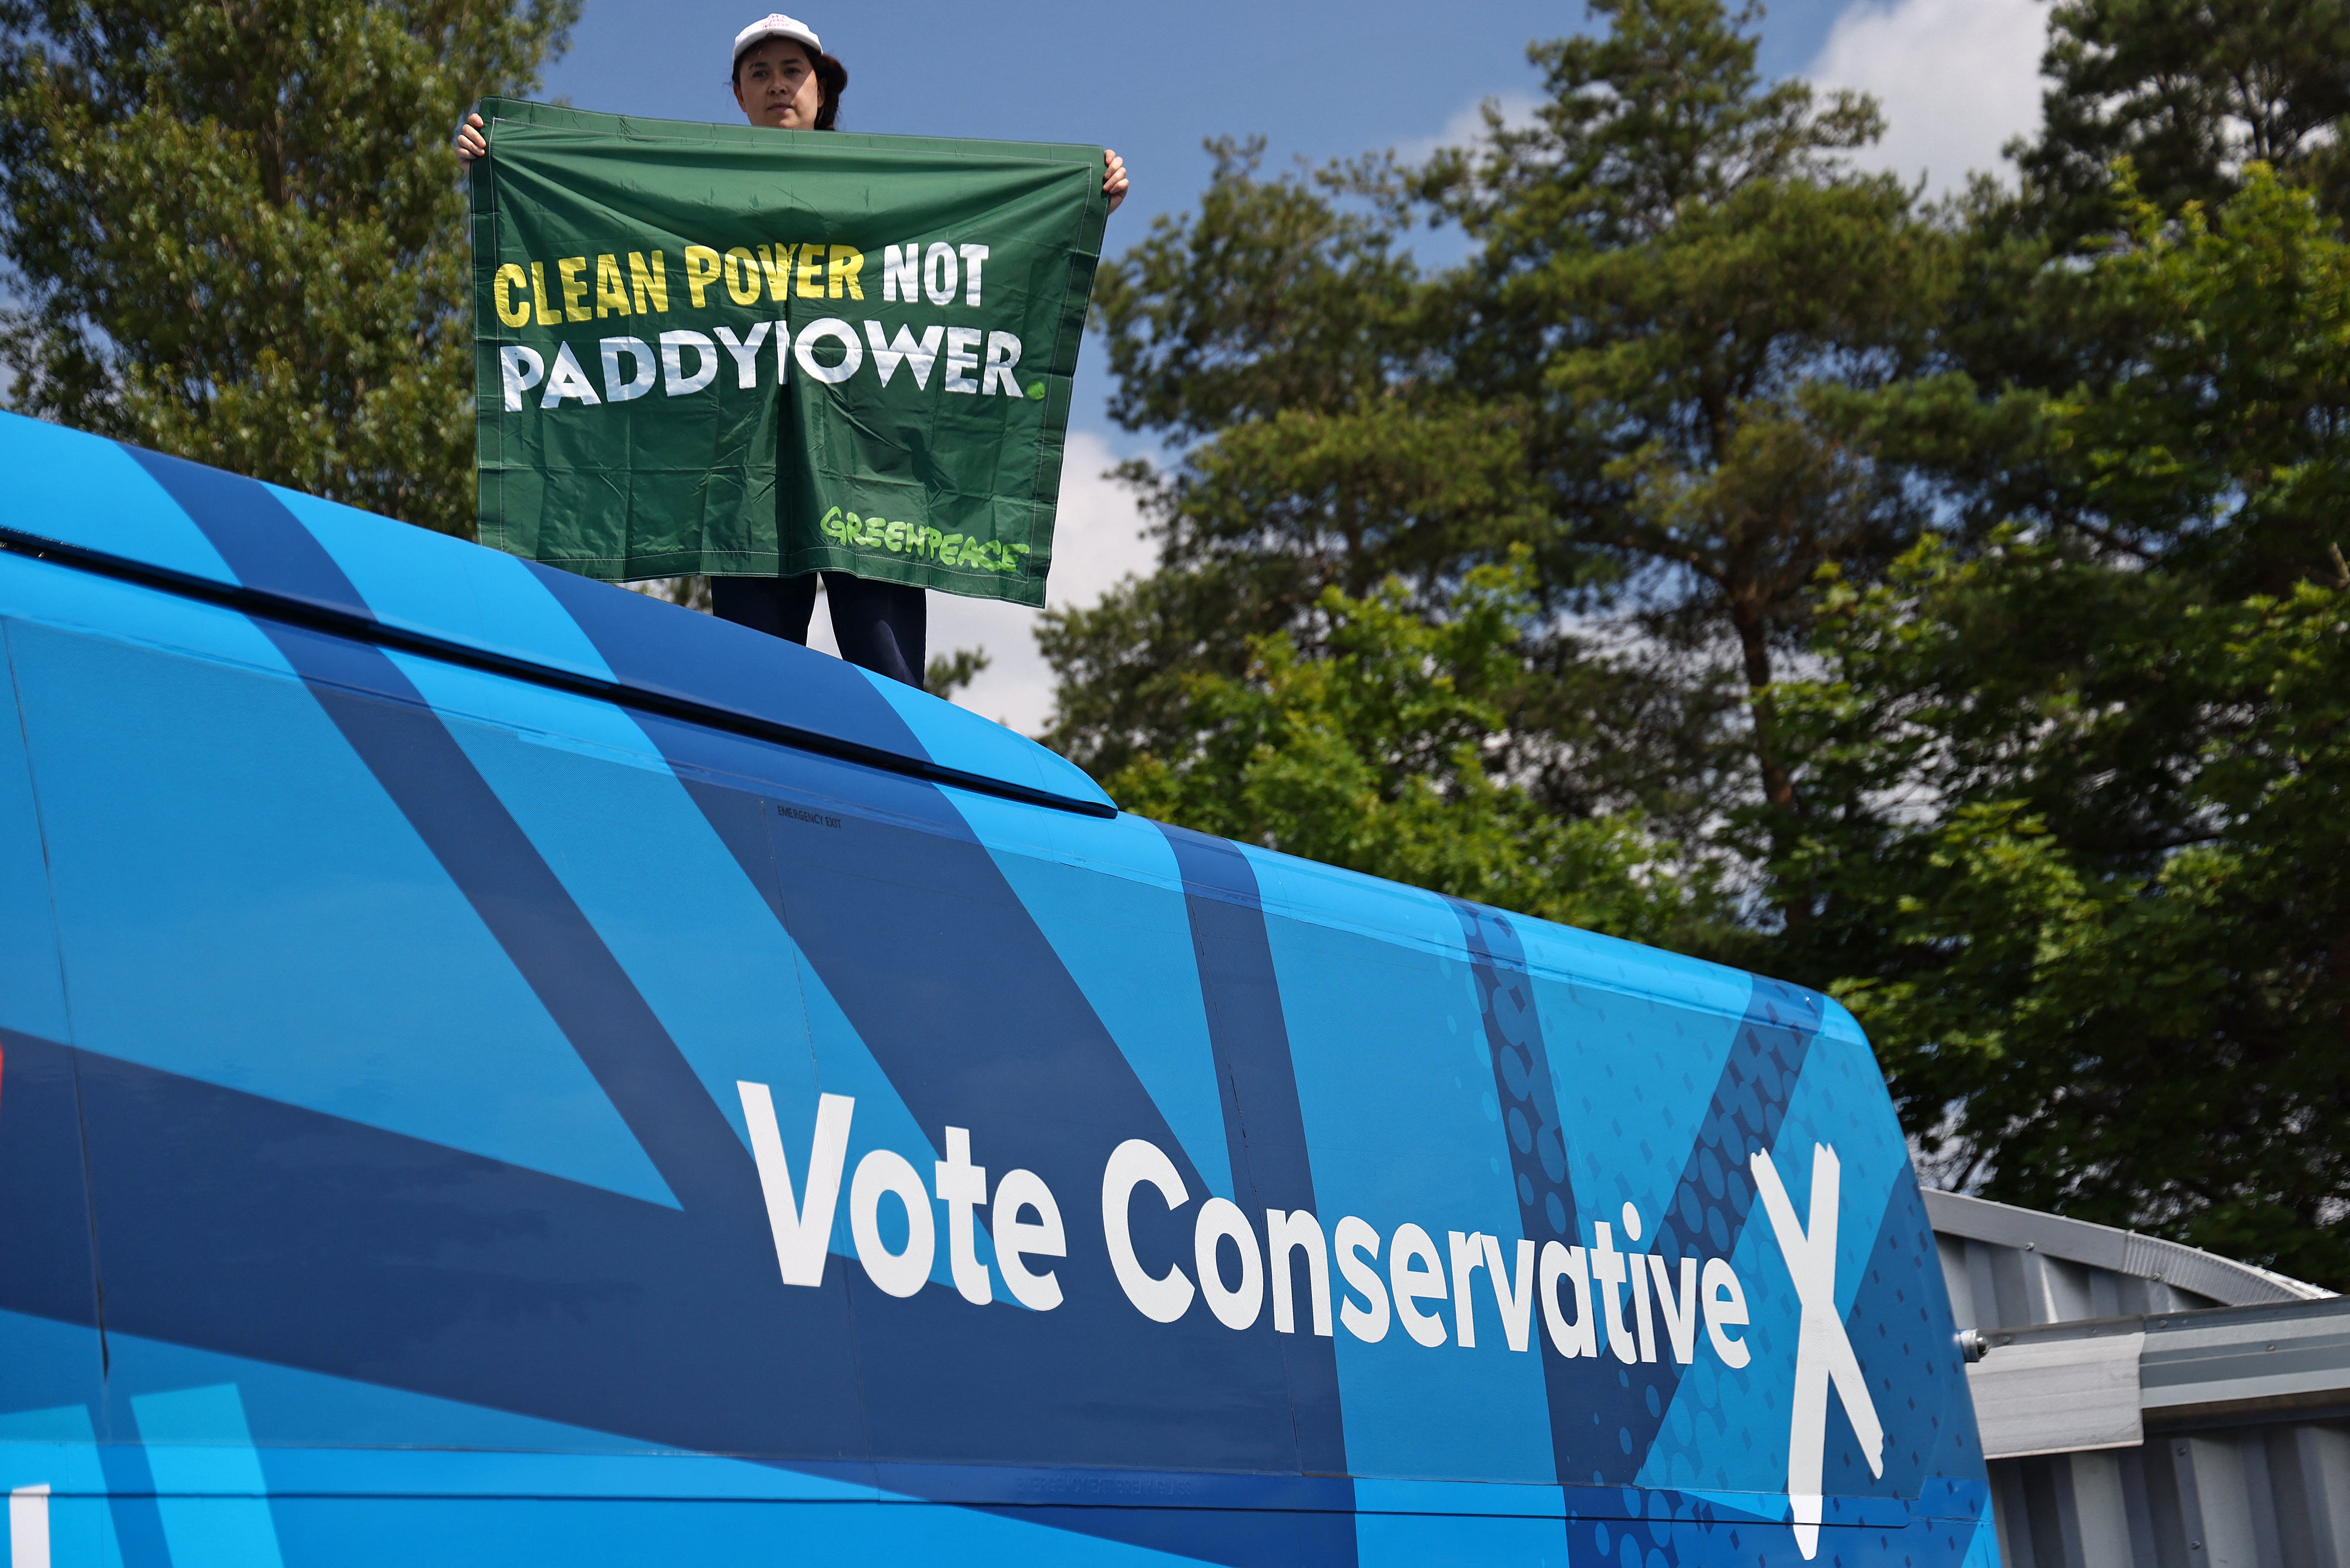 A demonstrator holds a Greenpeace banner calling for 'Clean Power, not PaddyPower' as they protest on the roof of the Conservative Party's General Election campaign bus in Nottingham